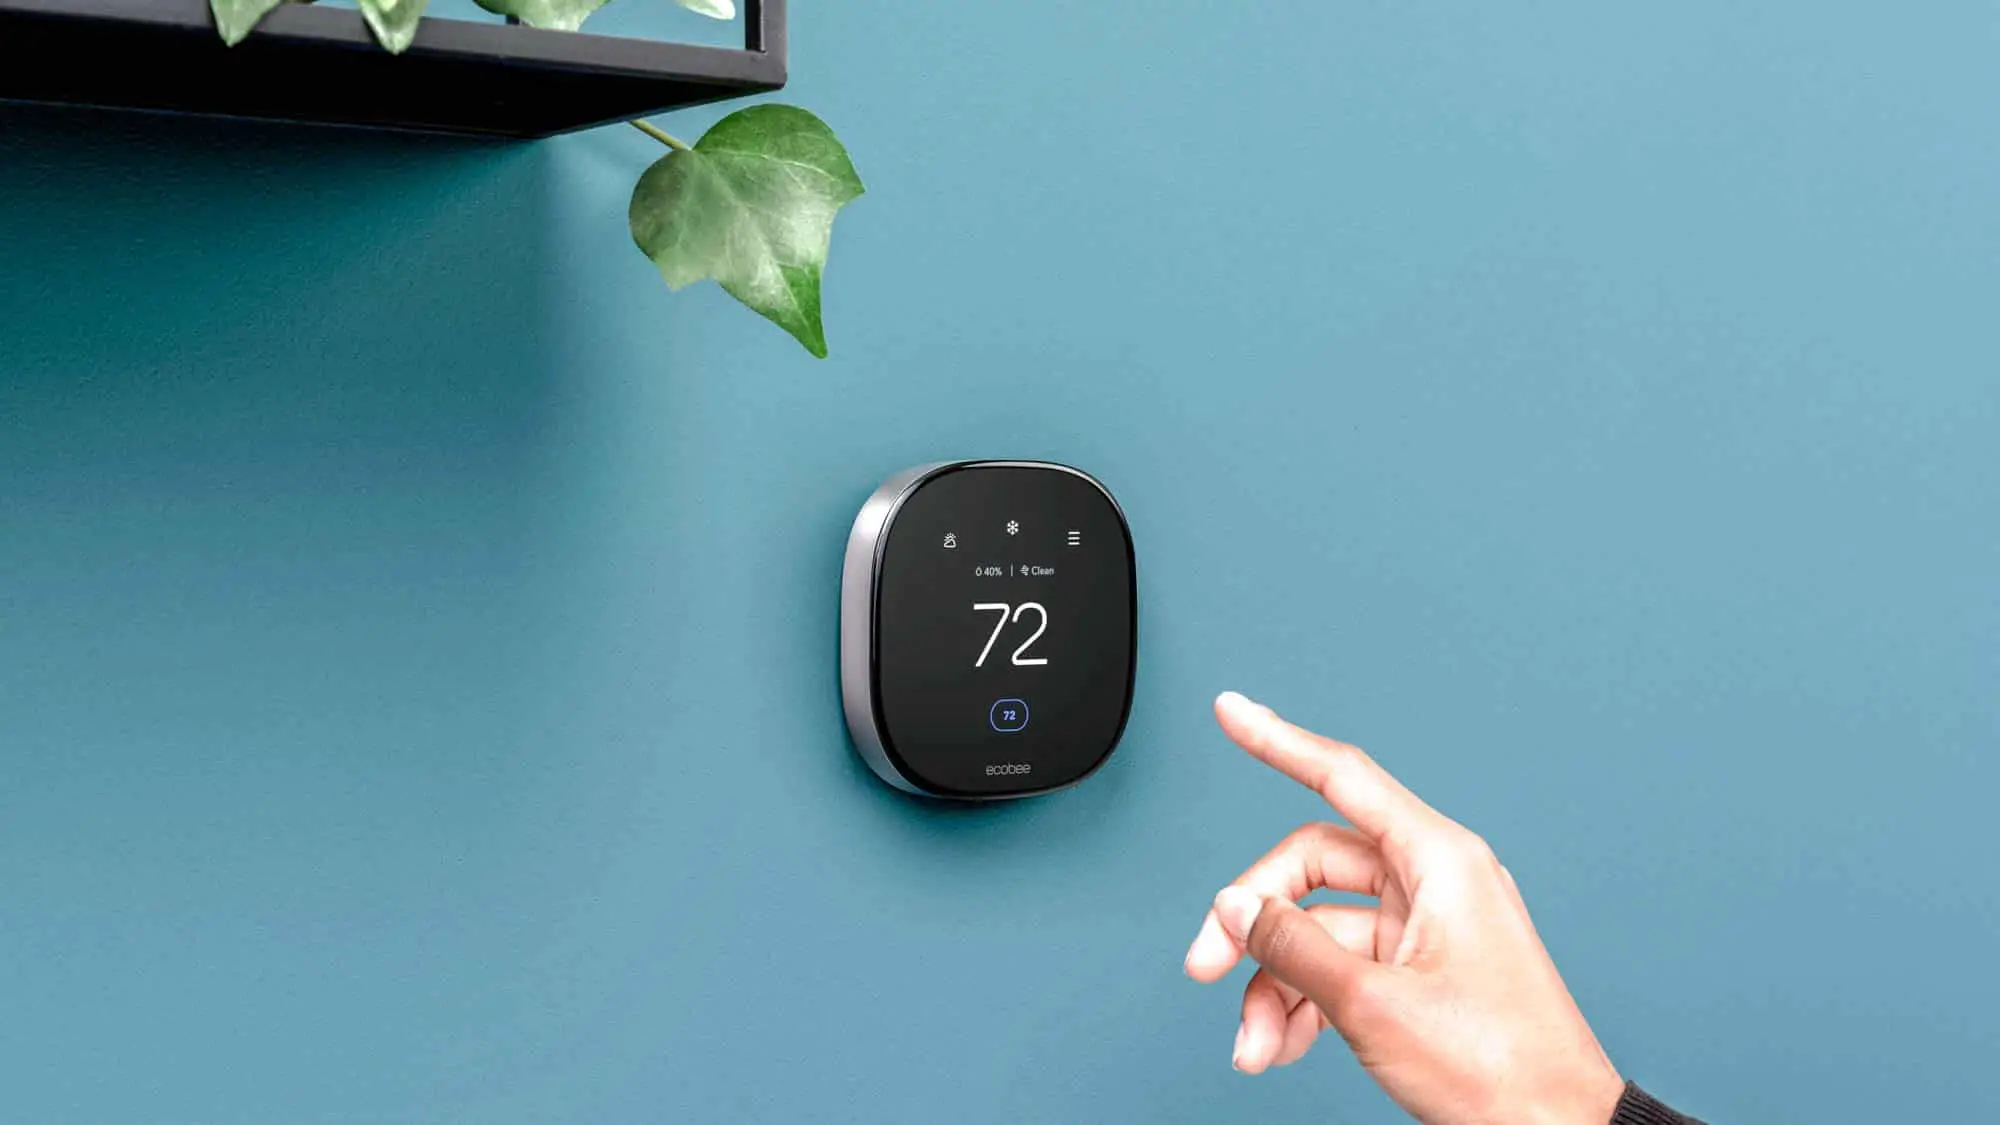 ecobee thermostat disconnecting from wifi